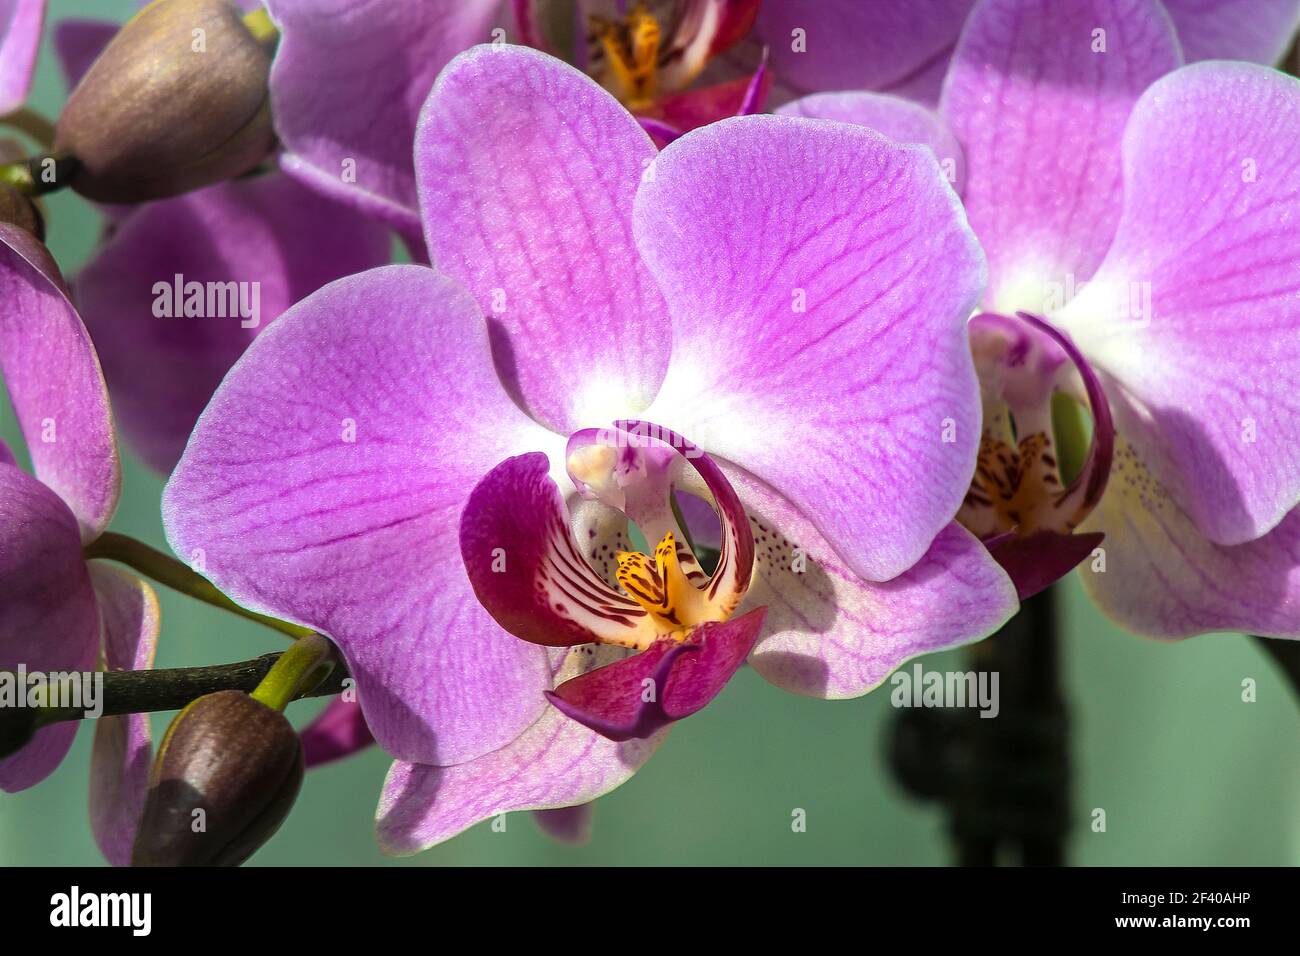 Vivid Orchid Flowers Together in Pot. Macro Detail fro Window Shelf. Stock Photo